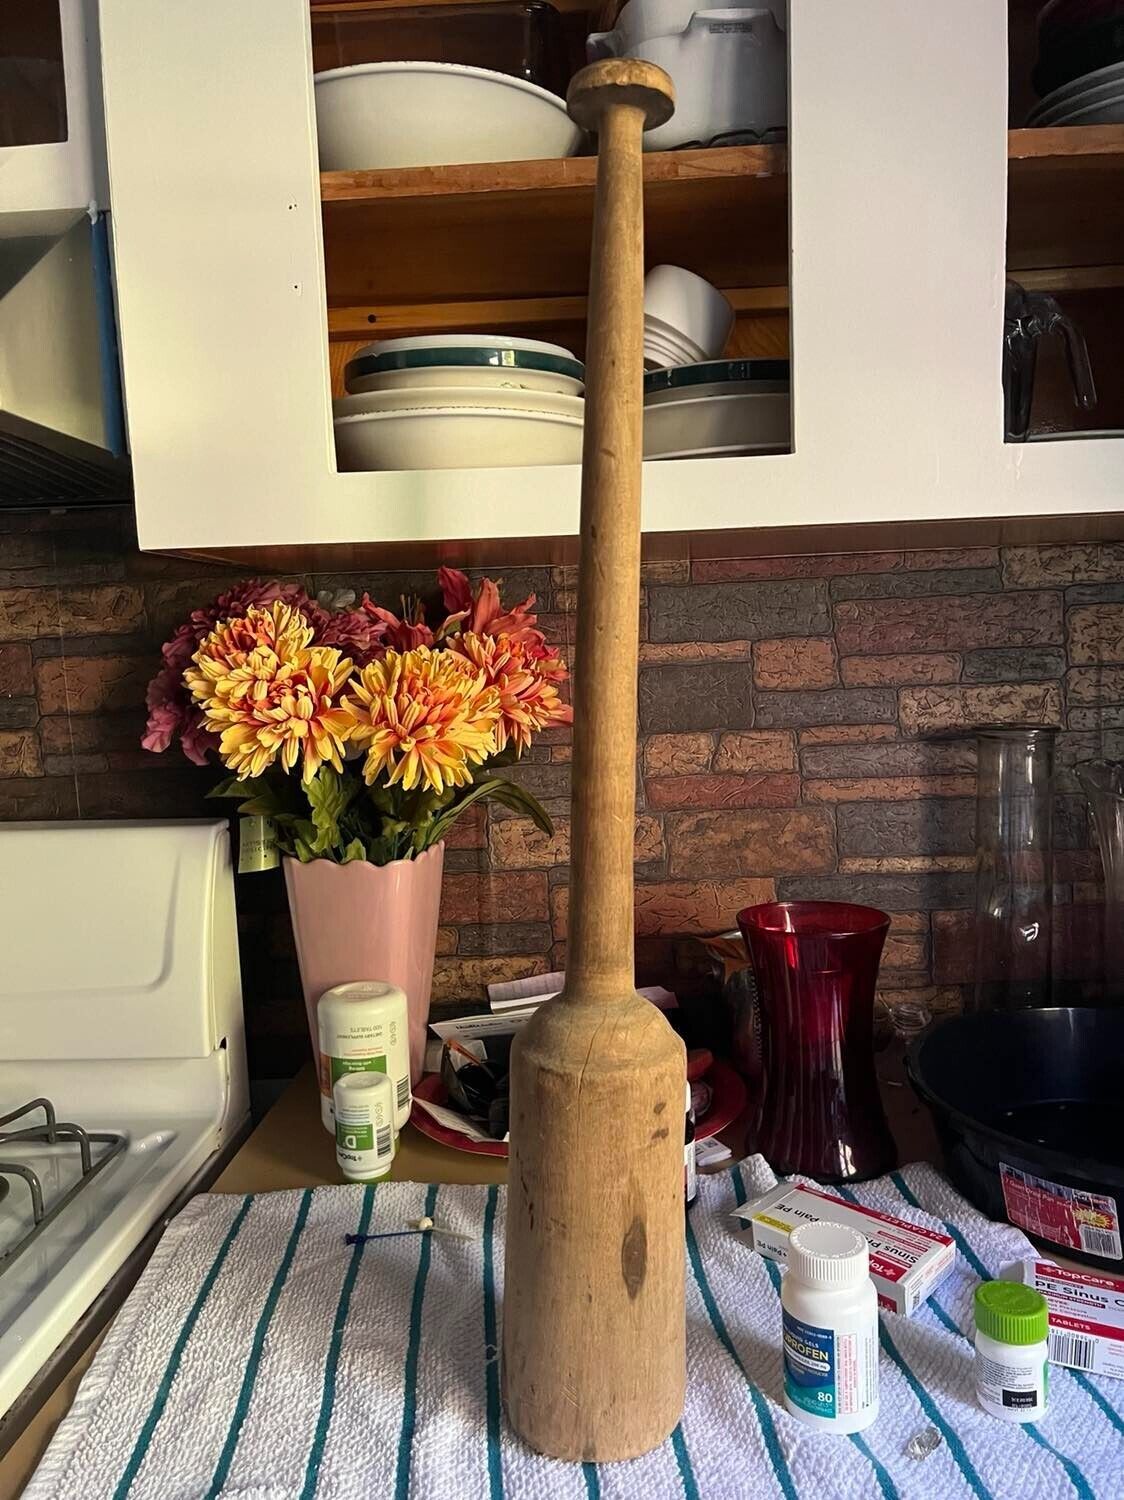 Masher Cabbage or Butter Churn Antique. Moving Everything on sale. See my listi